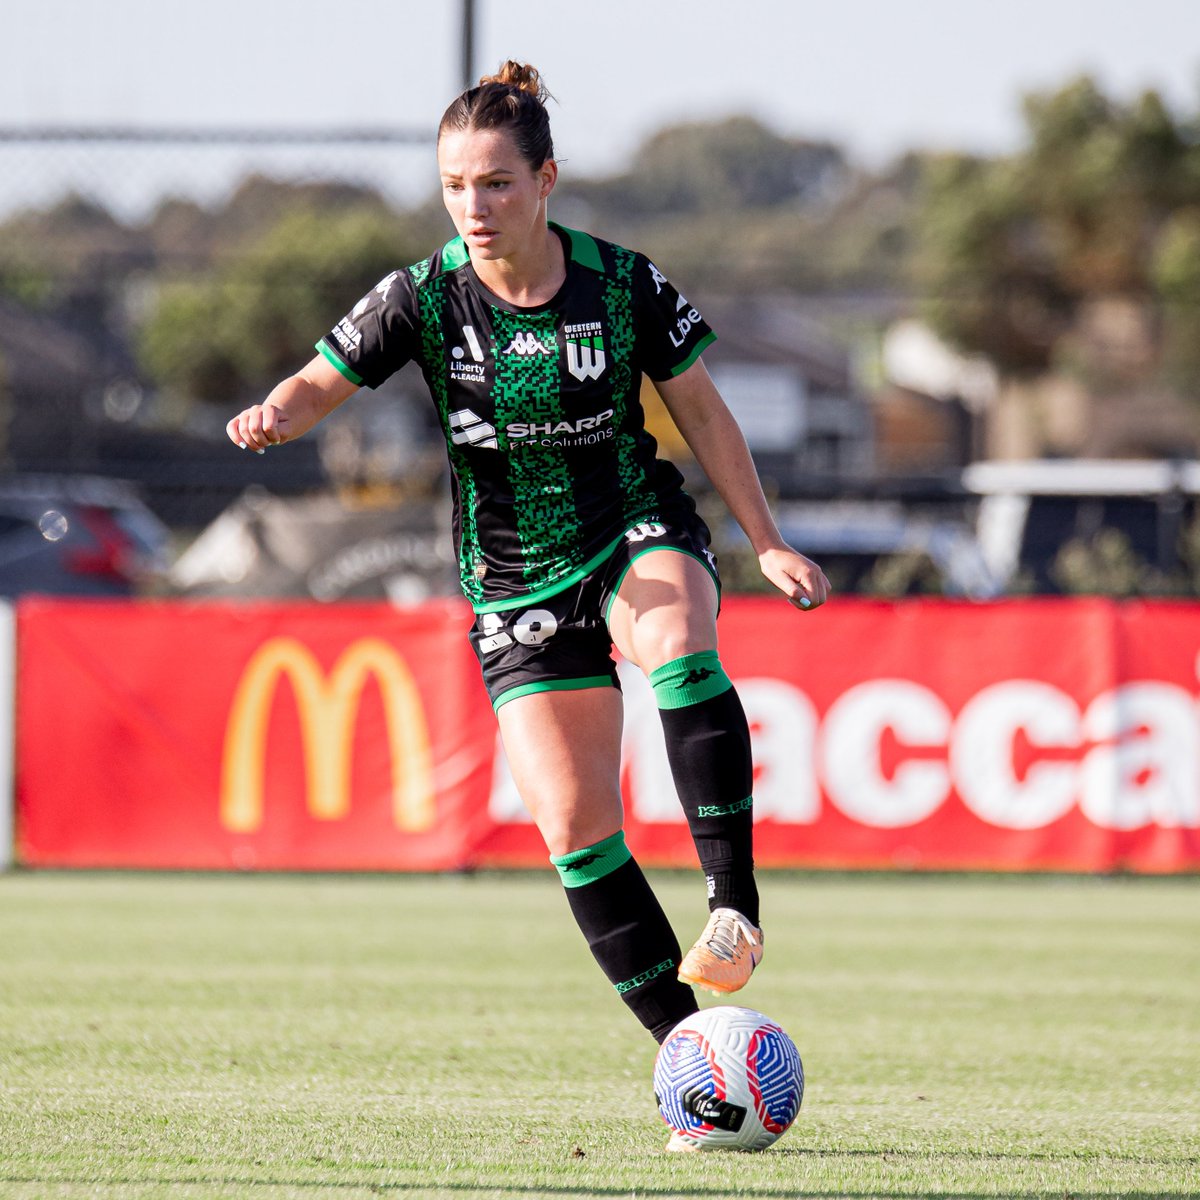 A big congratulations to Grace Maher, who was named on the bench in the @thepfa Team of the Season 👏 Worthy recognition for an outstanding season 💚🖤